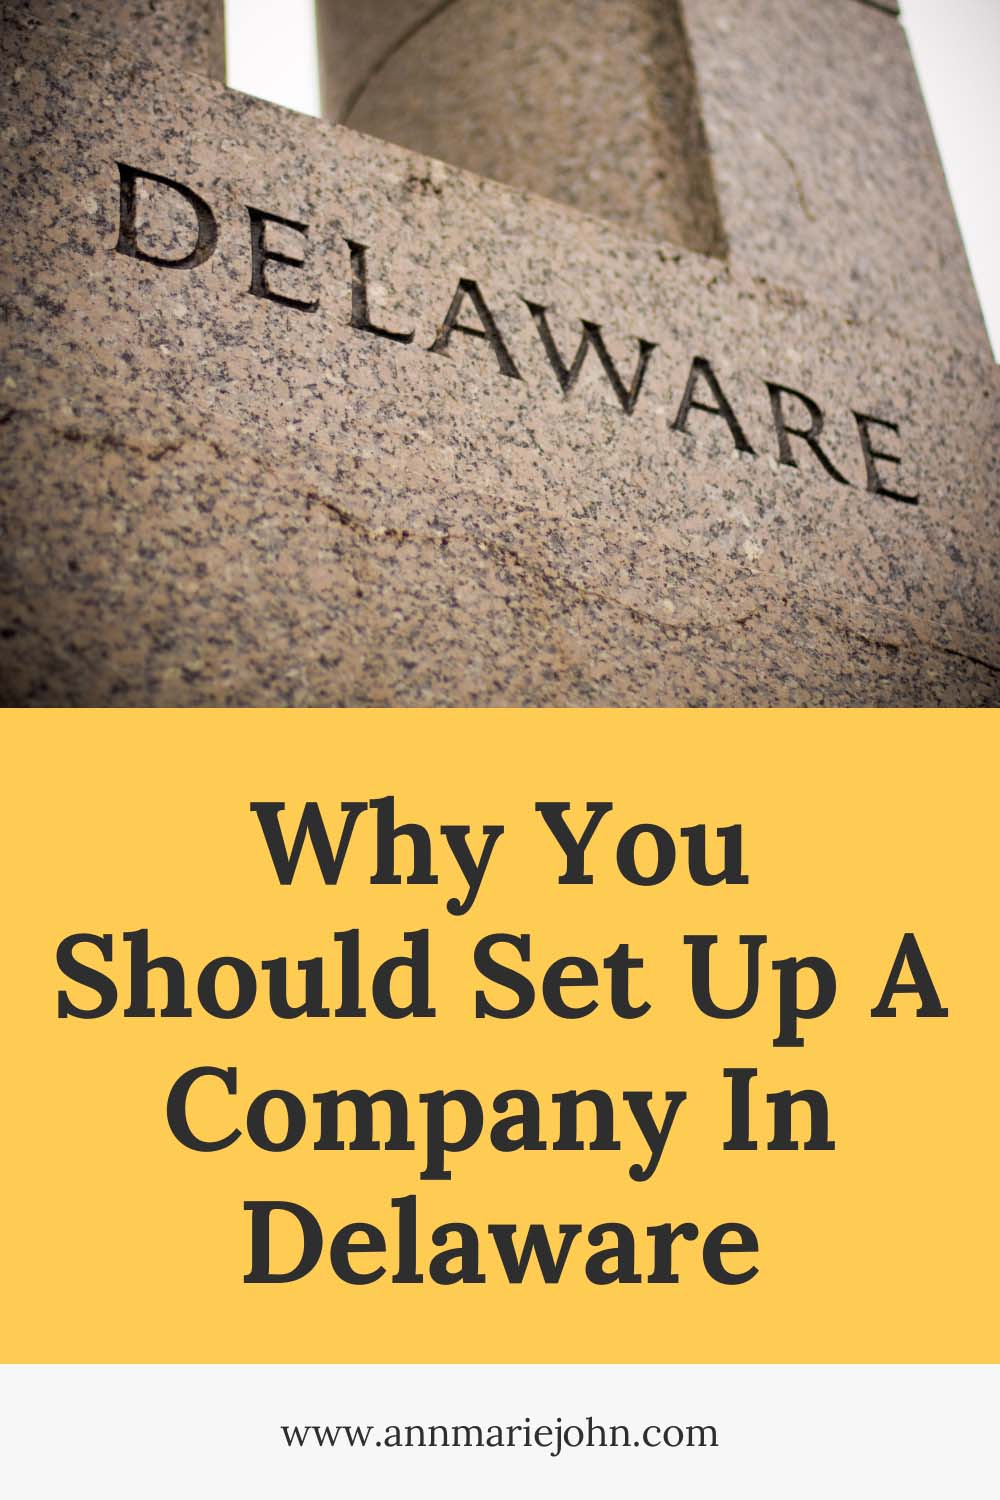 Why You Should Set Up A Company In Delaware